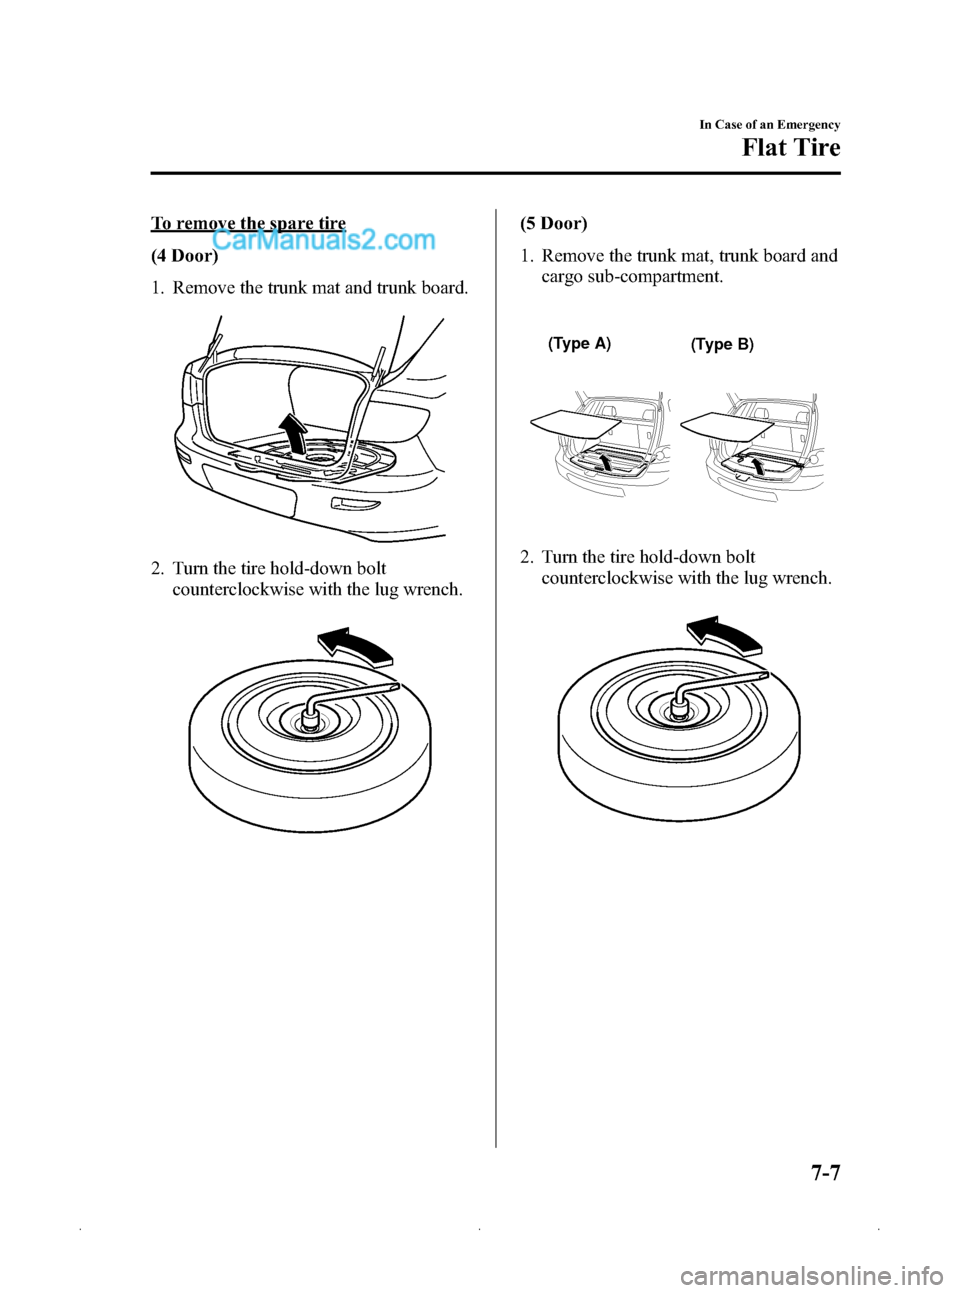 MAZDA MODEL MAZDASPEED 3 2009  Owners Manual (in English) Black plate (269,1)
To remove the spare tire
(4 Door)
1. Remove the trunk mat and trunk board.
2. Turn the tire hold-down boltcounterclockwise with the lug wrench.
(5 Door)
1. Remove the trunk mat, tr